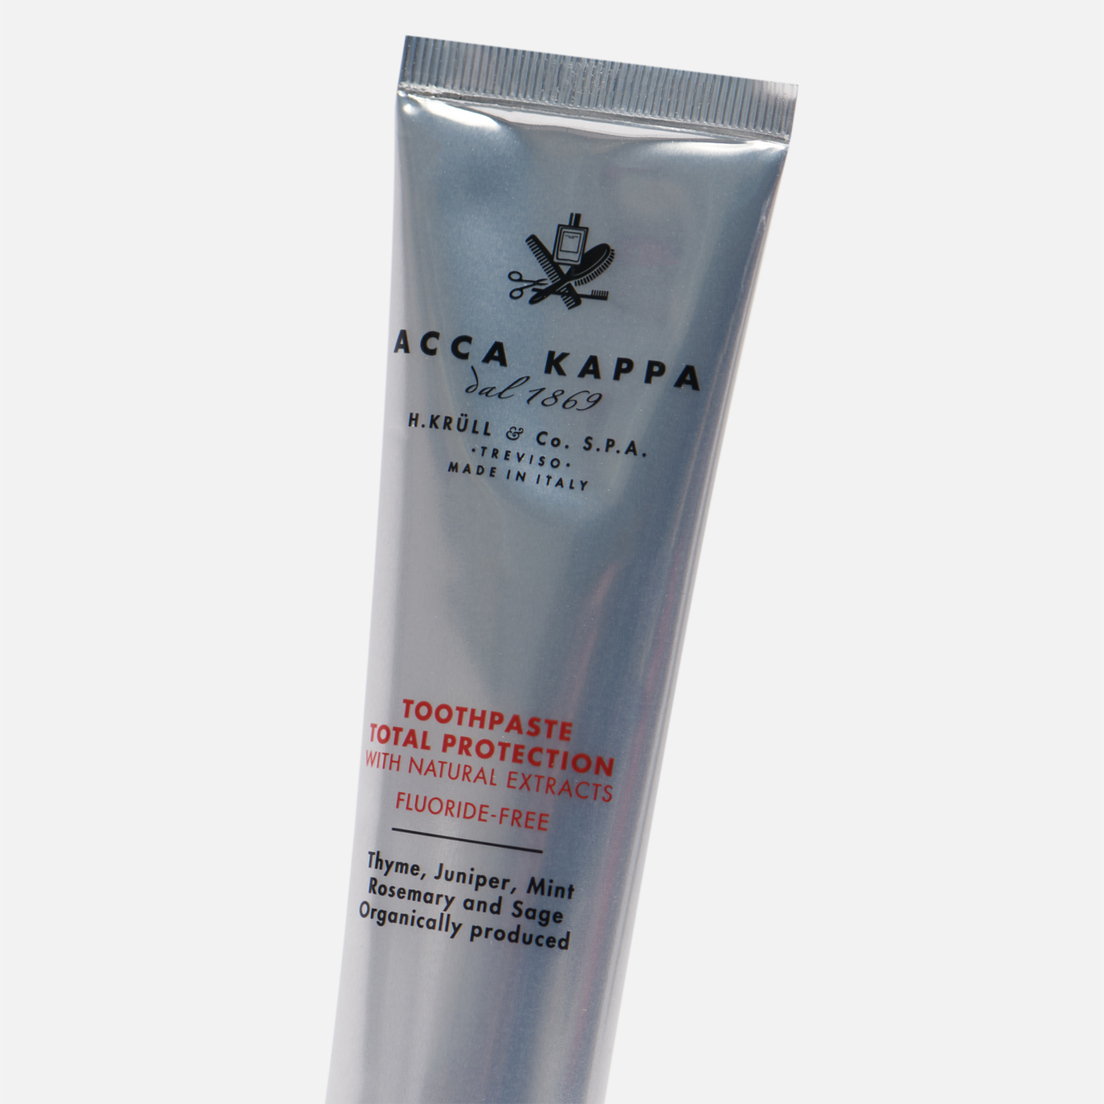 Acca Kappa Зубная паста Total Protection Fluoride-Free